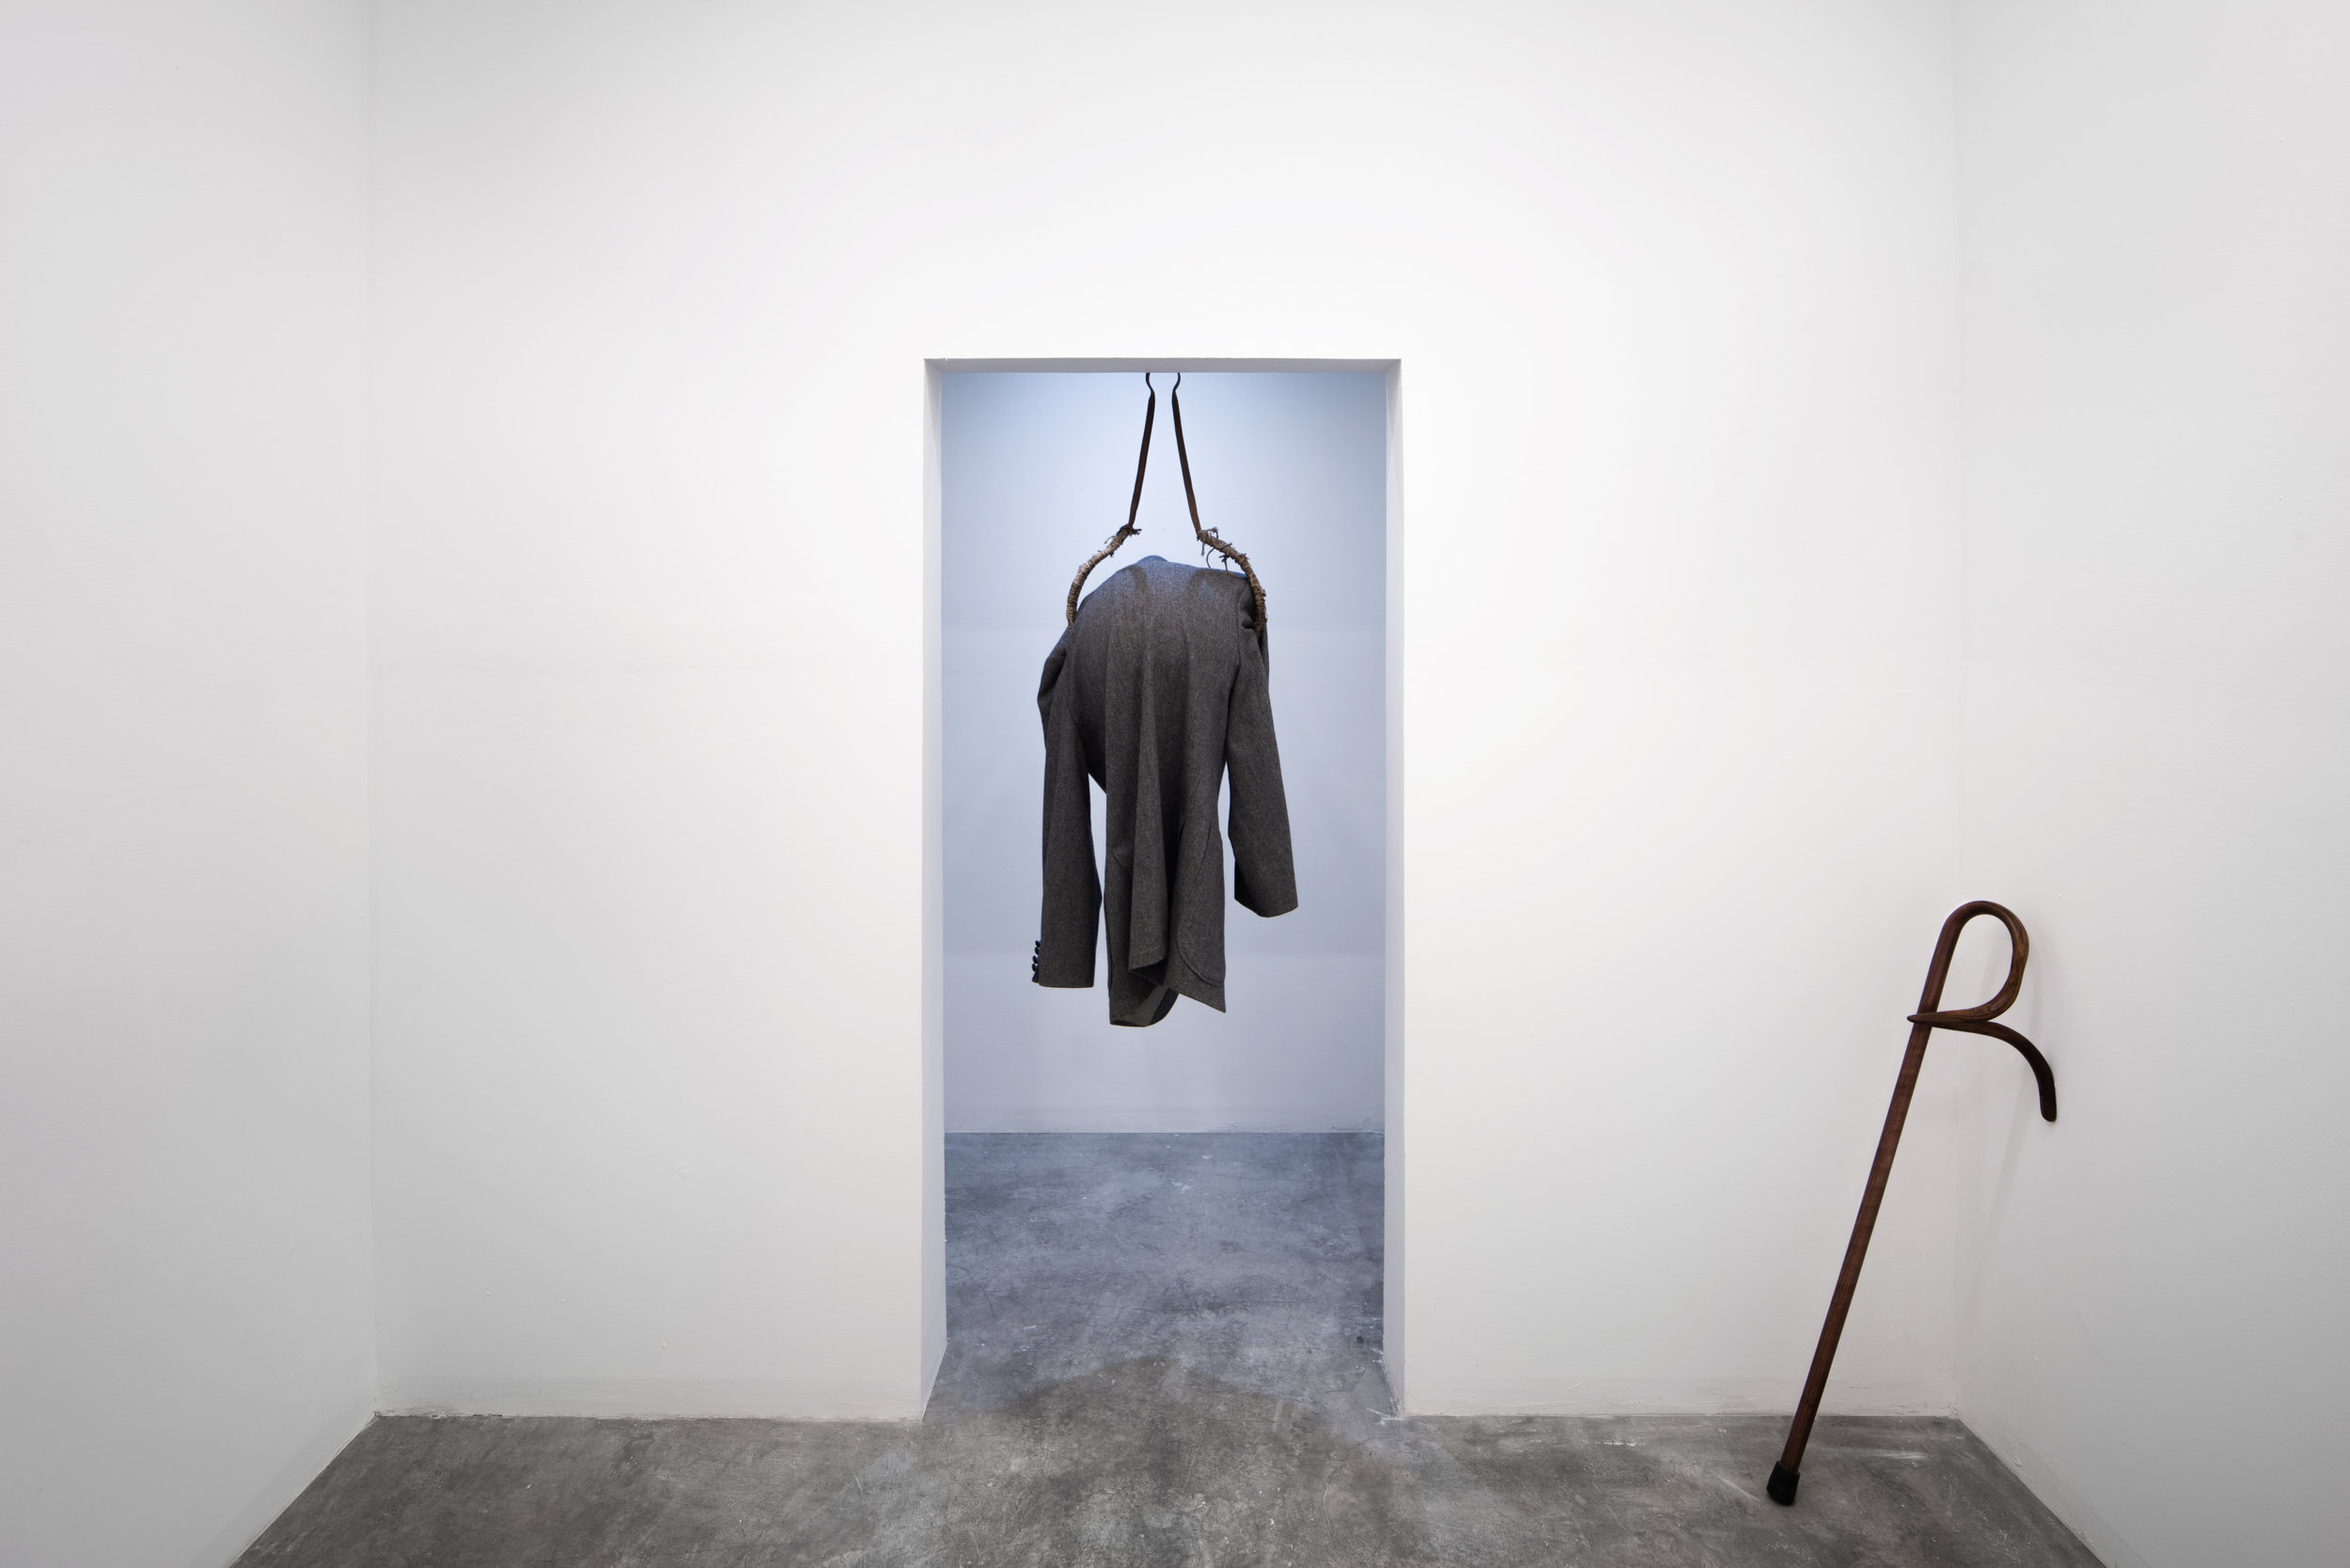  Moch Hahn,  You're Late , 2018, Found suit coat, metal, rope, plastic globe 46'' x 17'' x 14''  